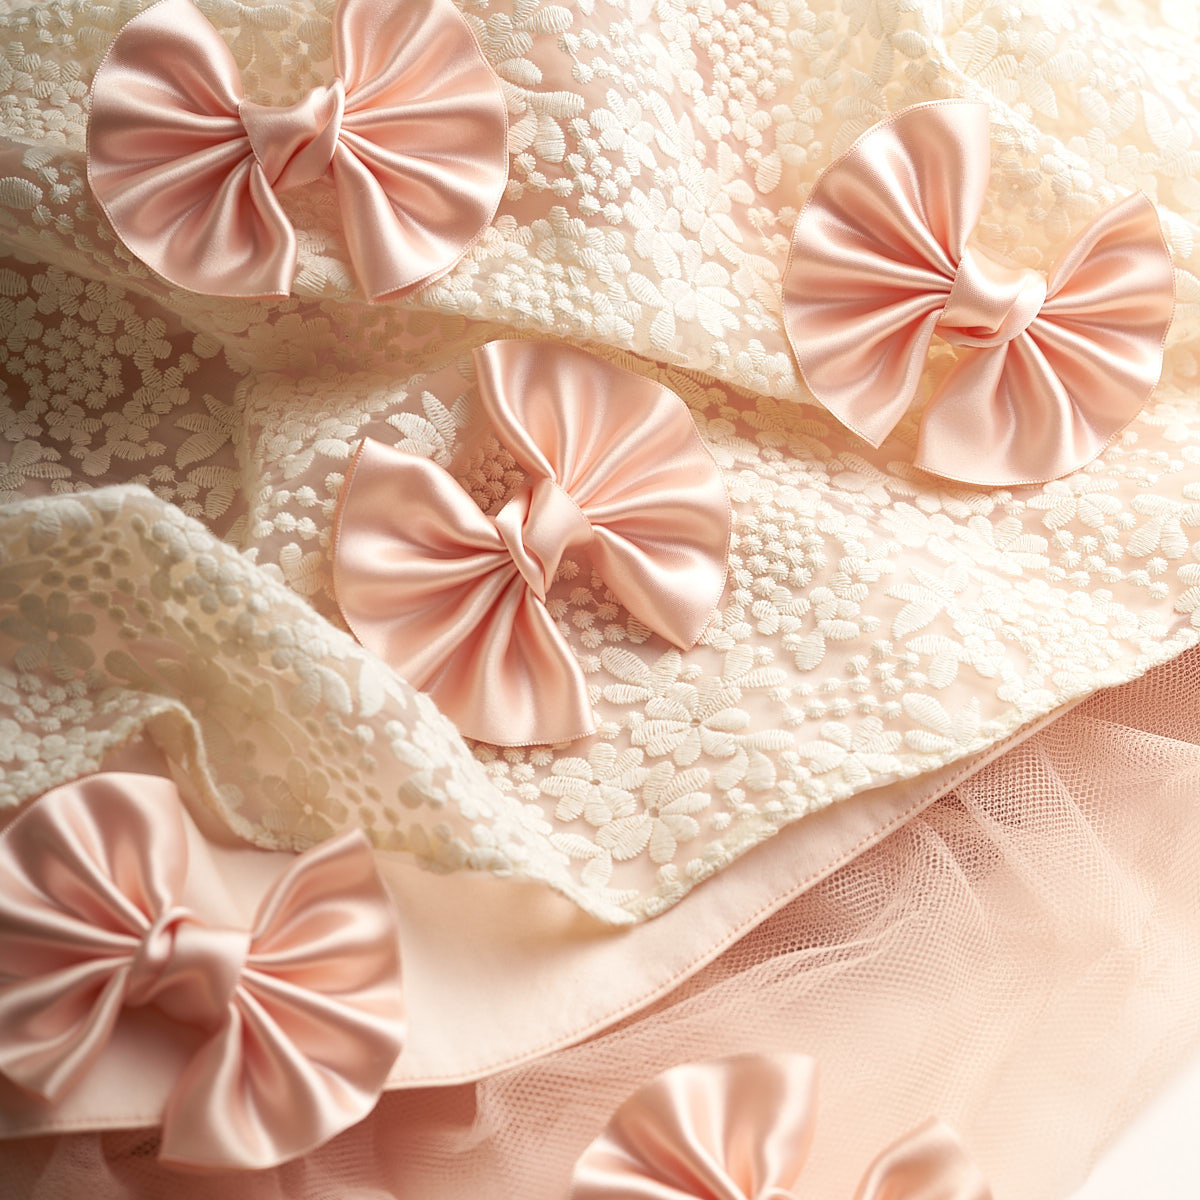 Home Impression Originale blush pink satin winged bow on lace fabric lush pink background